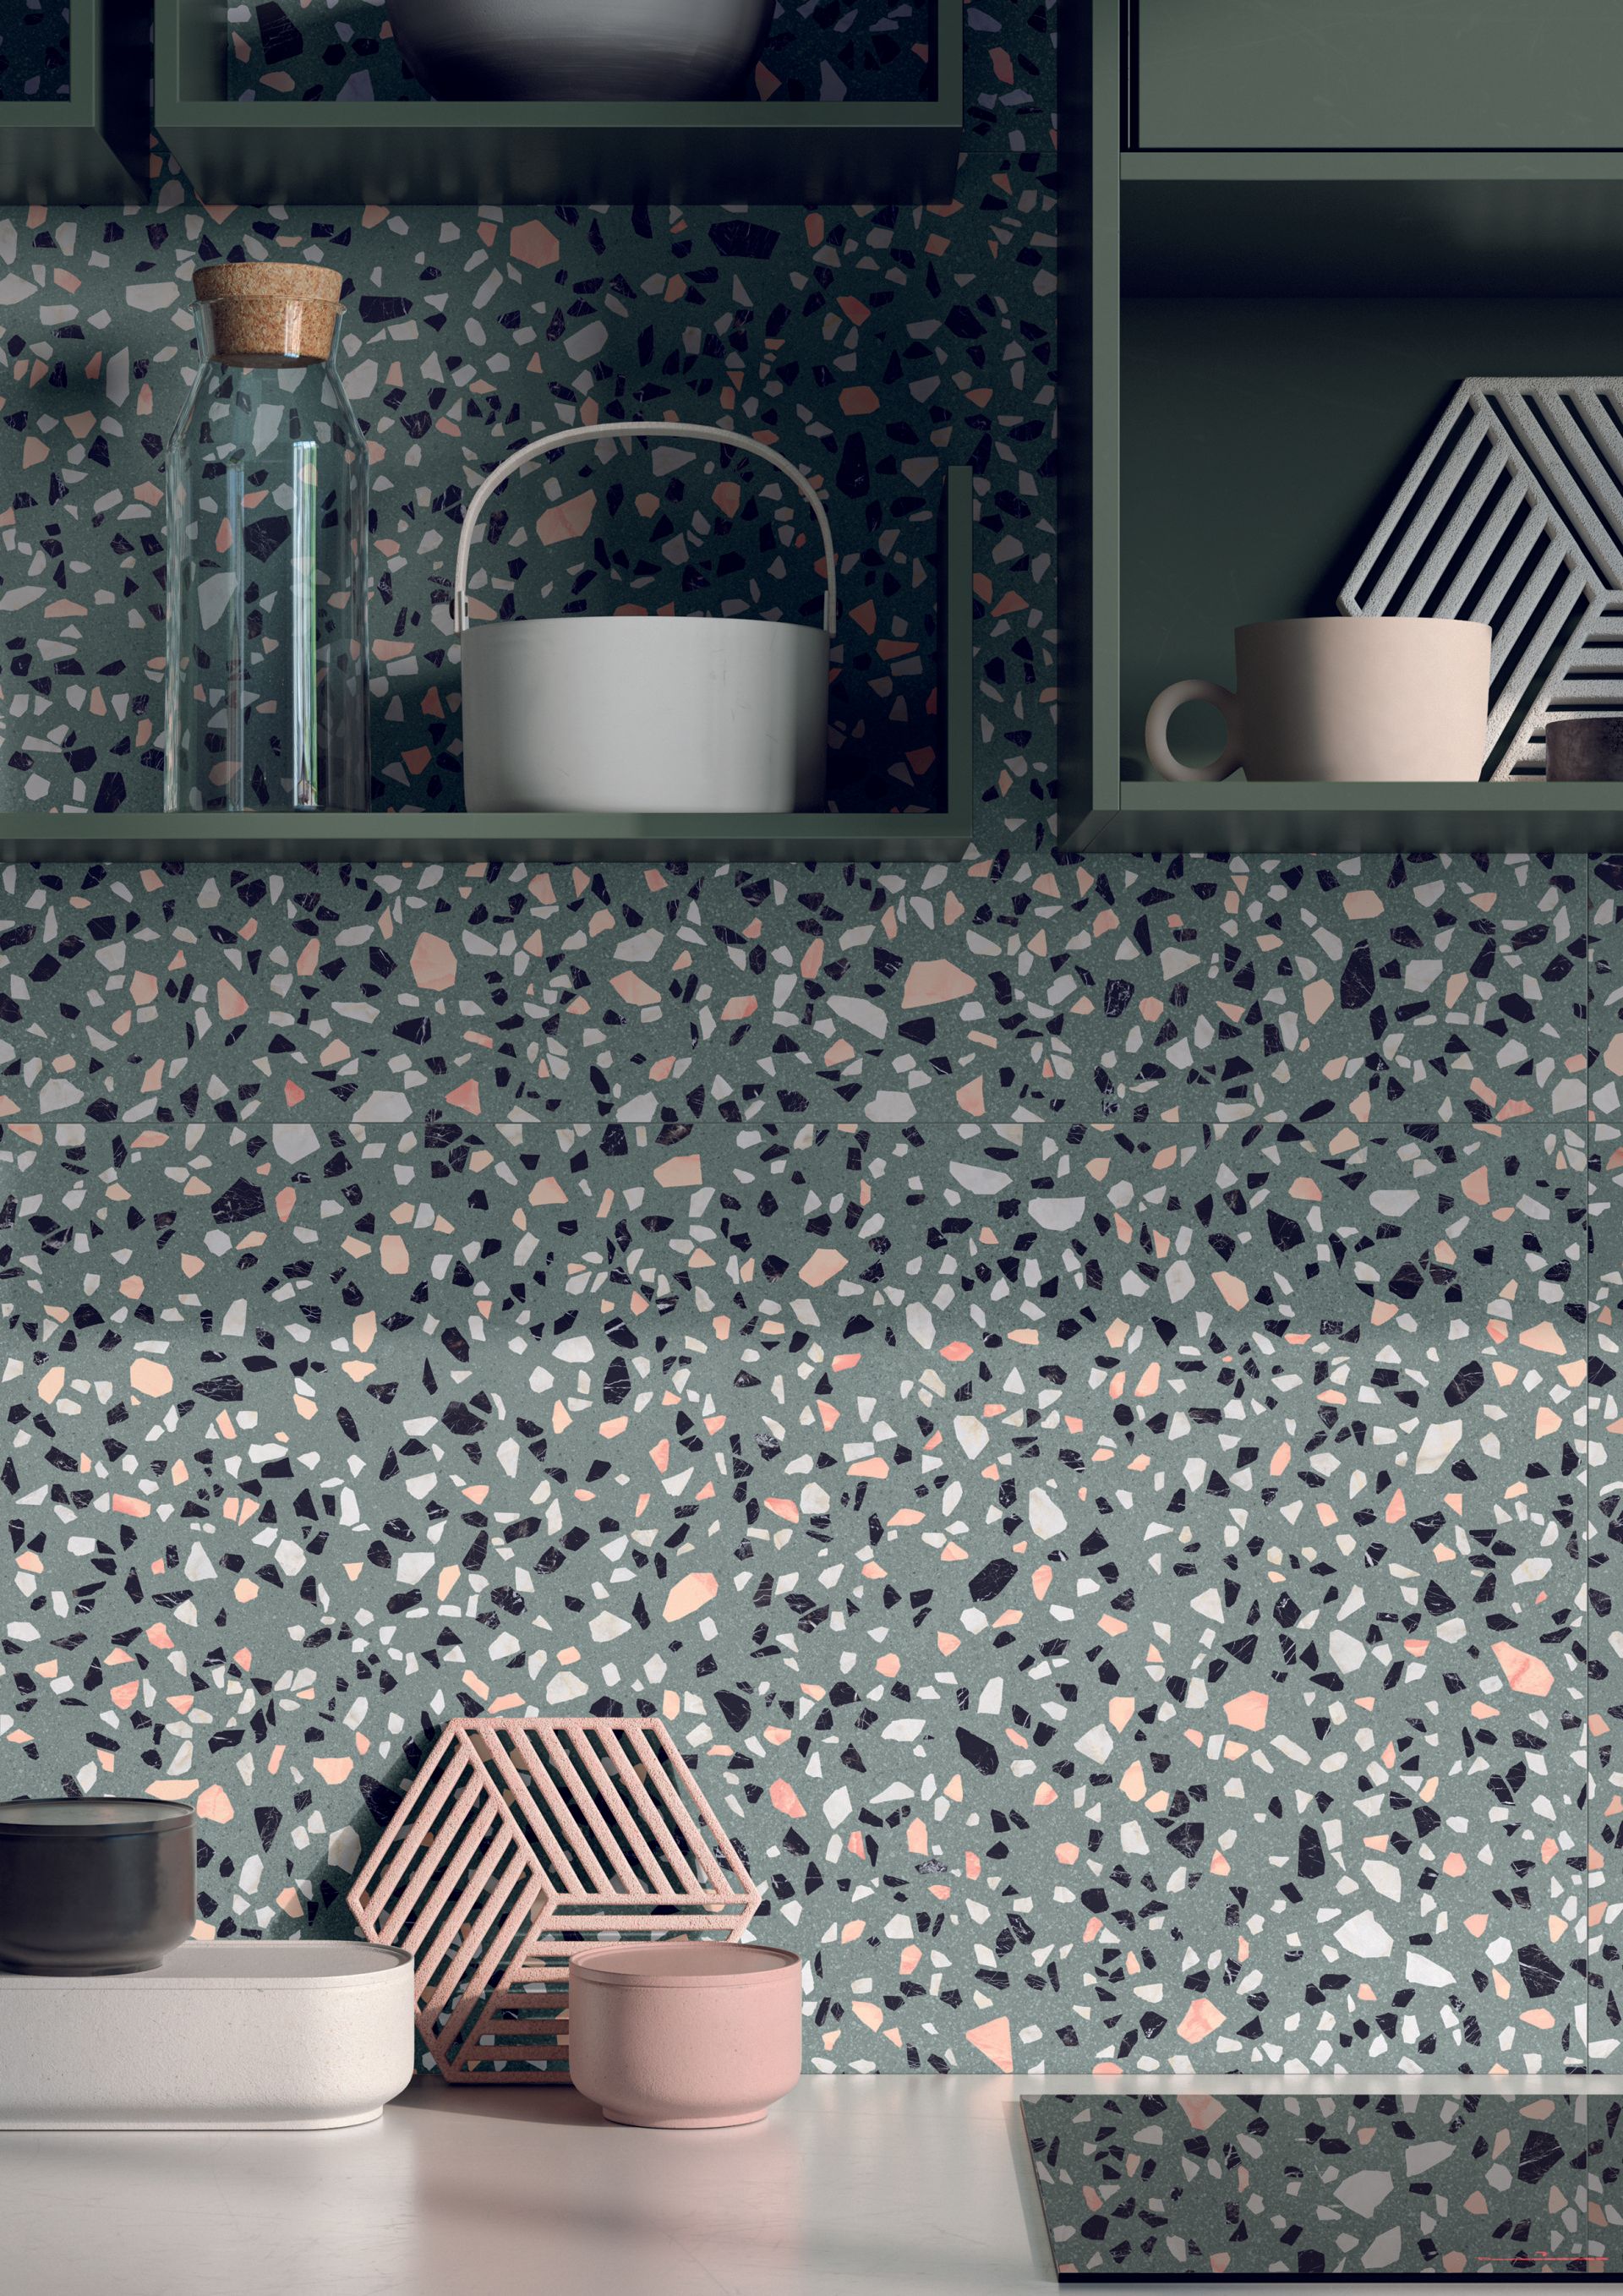 terrazzo tiles, kitchen design with cabinets and utensils